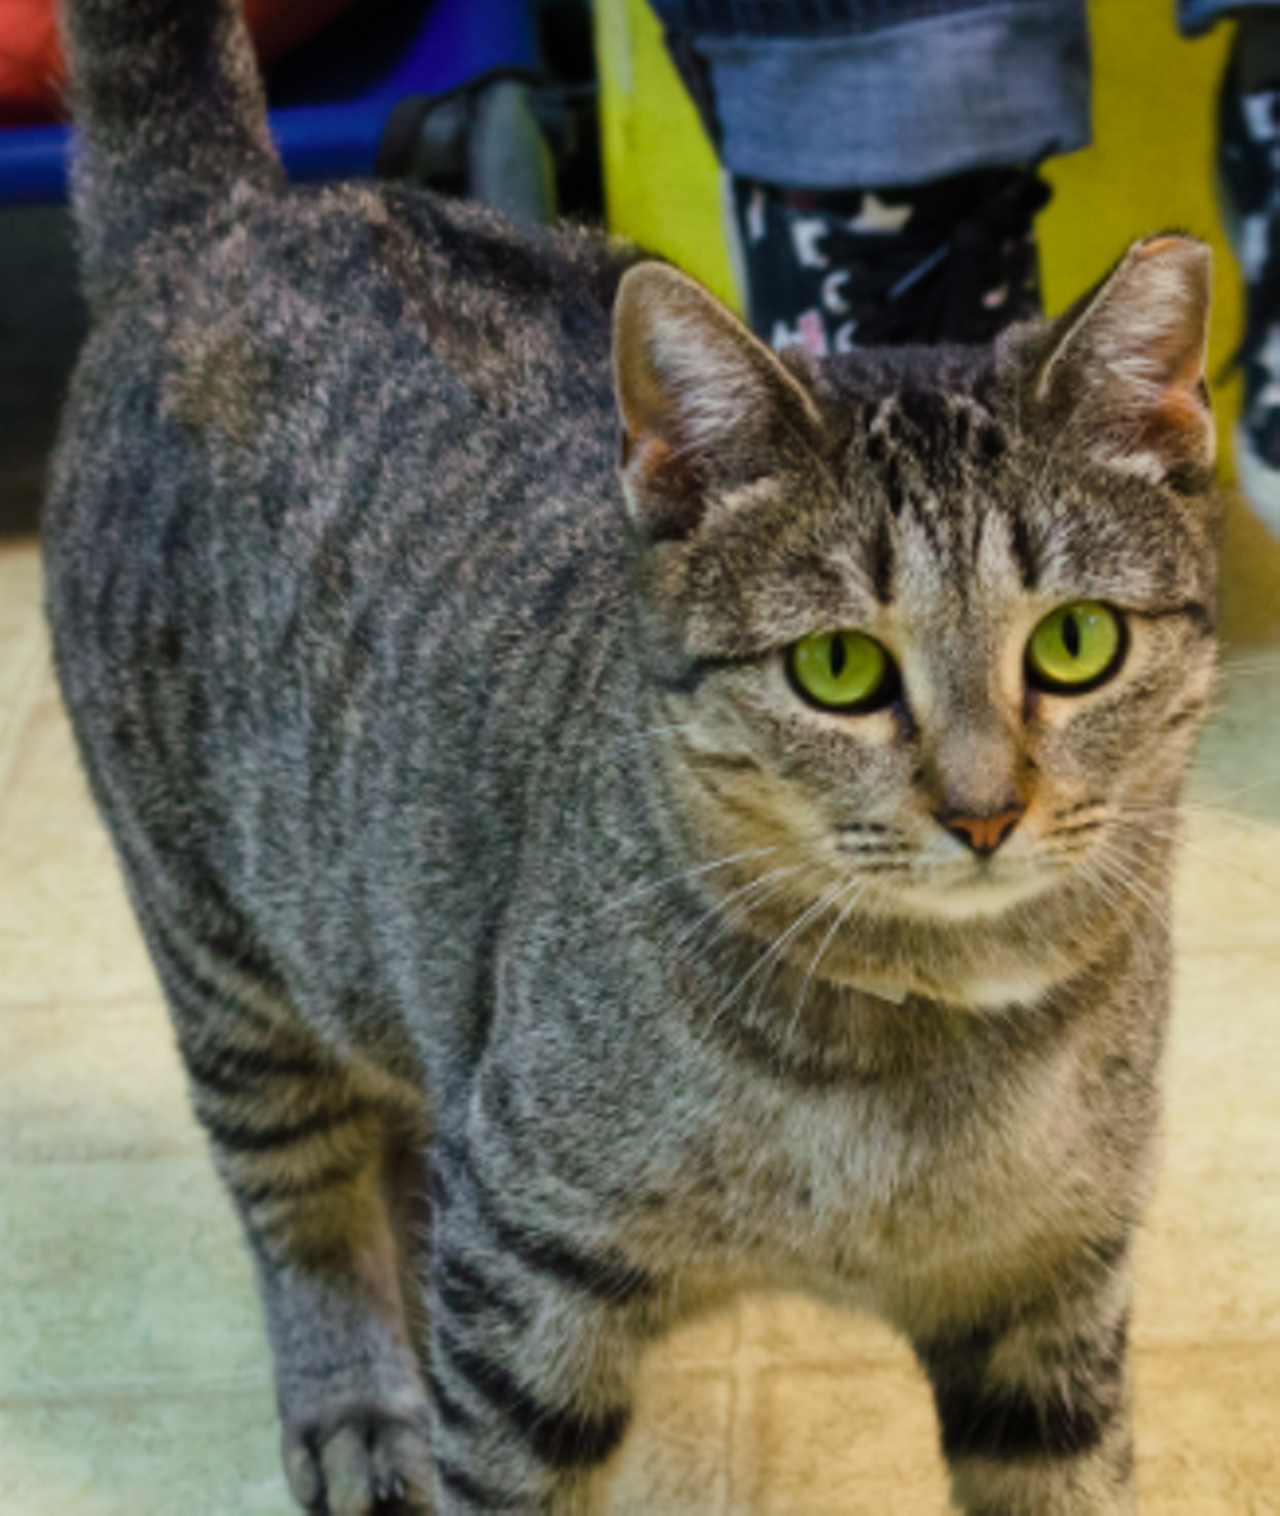 CharlotteHi, I’m Charlotte! Come over to the cattery room to hang out with me. It will be very fun and entertaining. I love meeting new people!